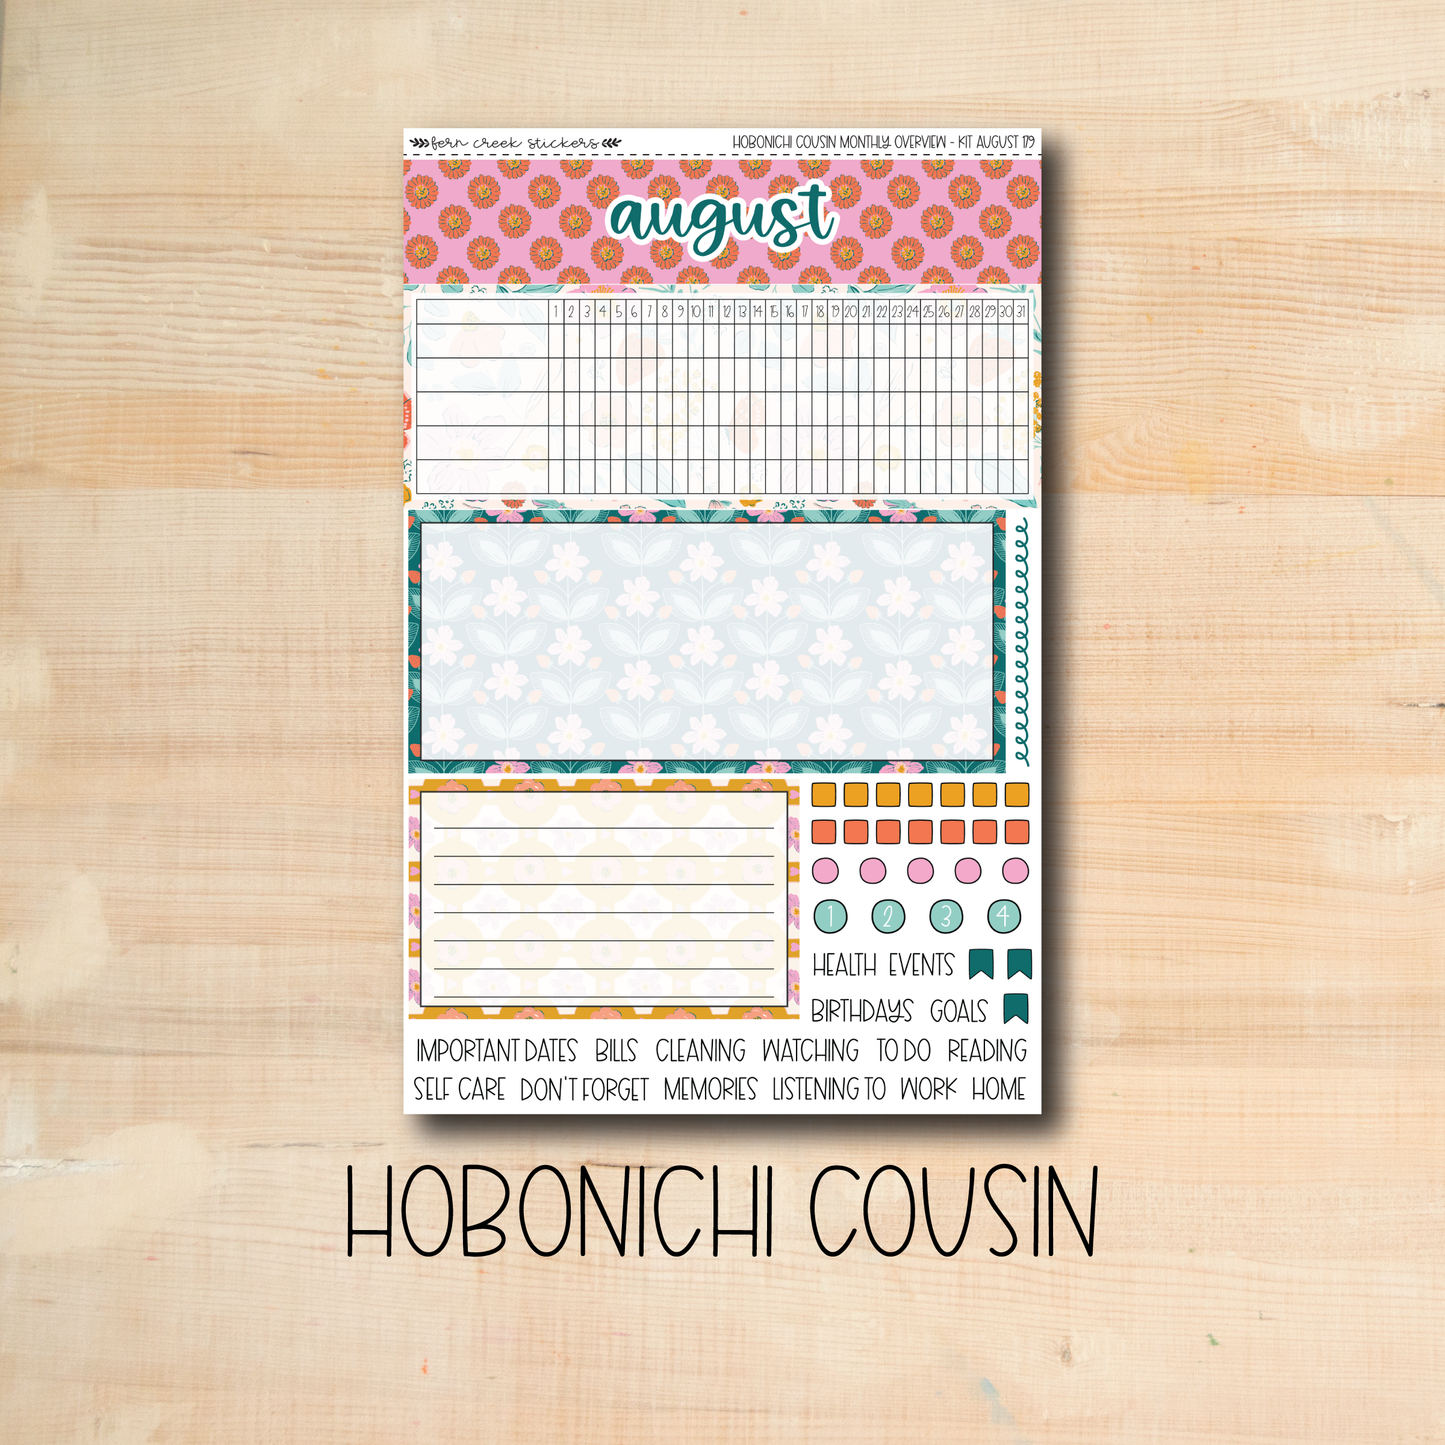 HCMO-179 || SUMMER SUN August Hobonichi Cousin monthly overview